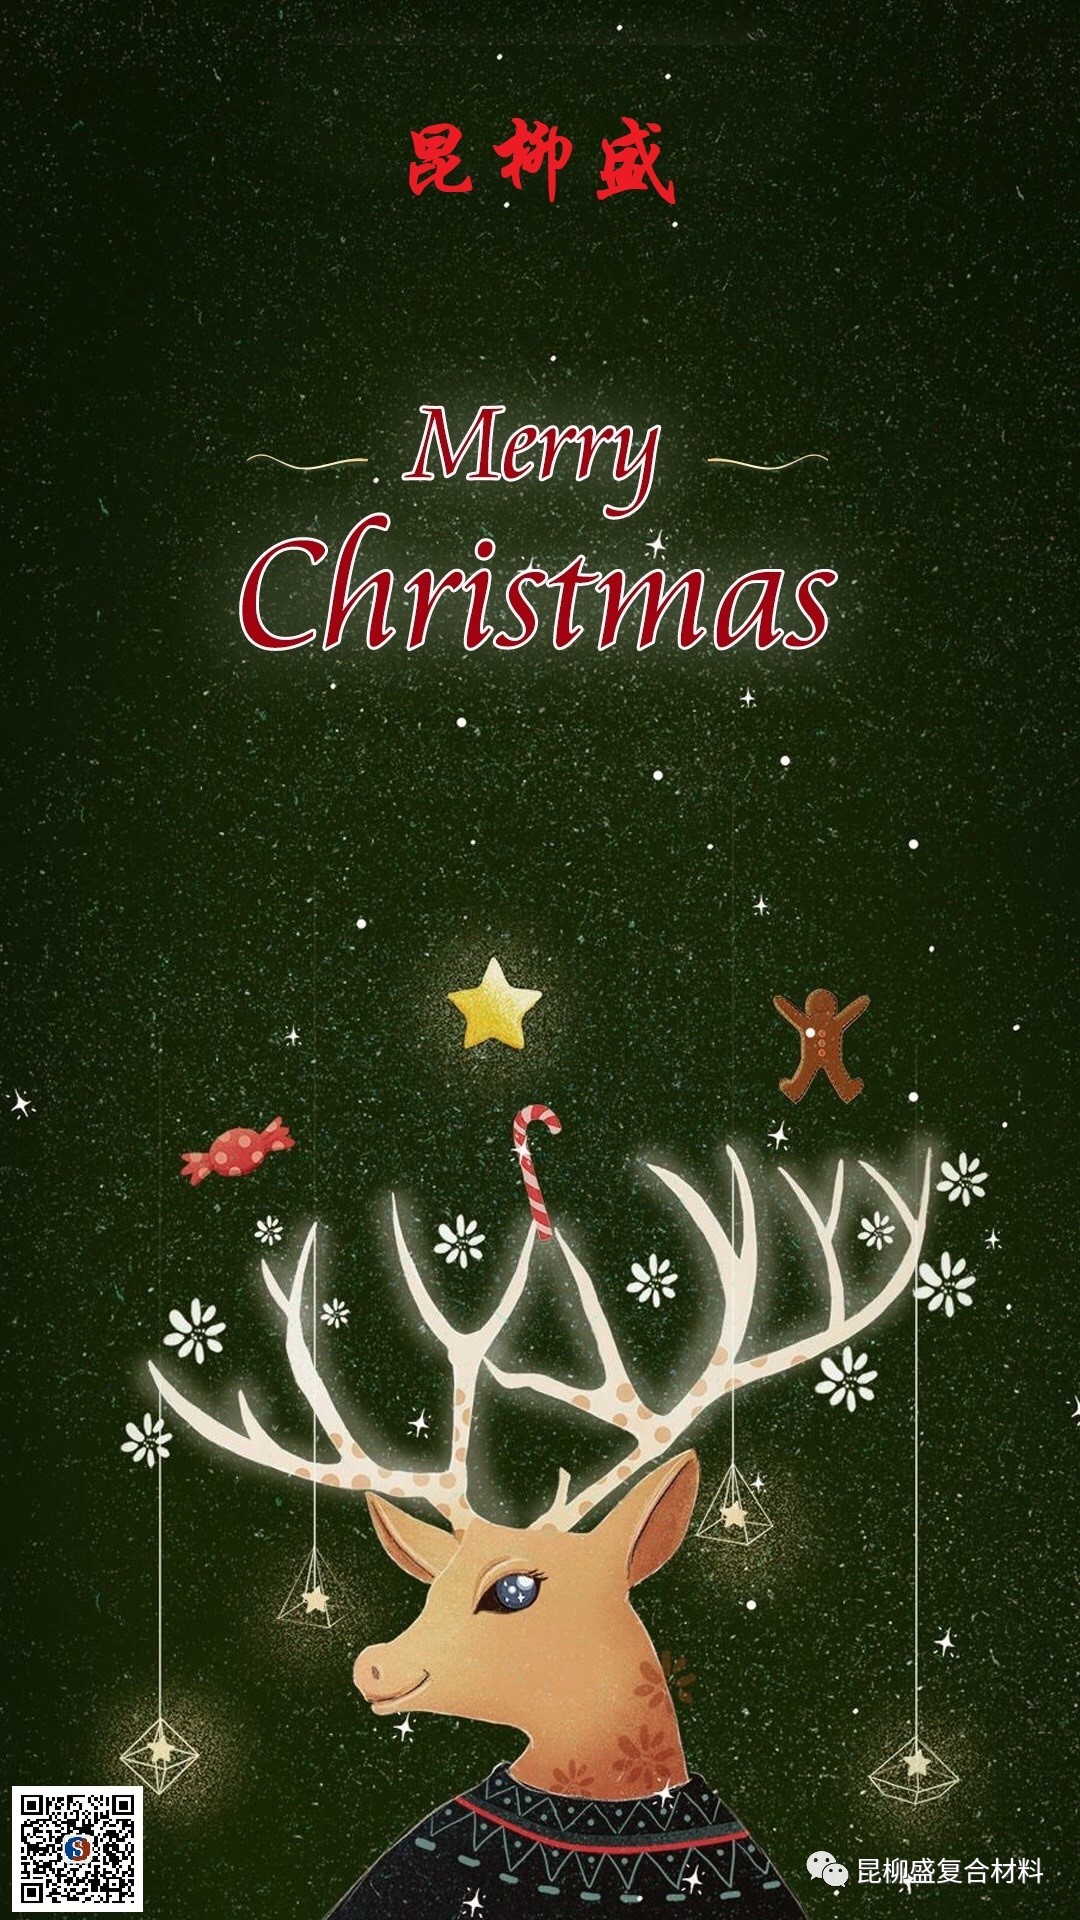 Merry Xmas To You all